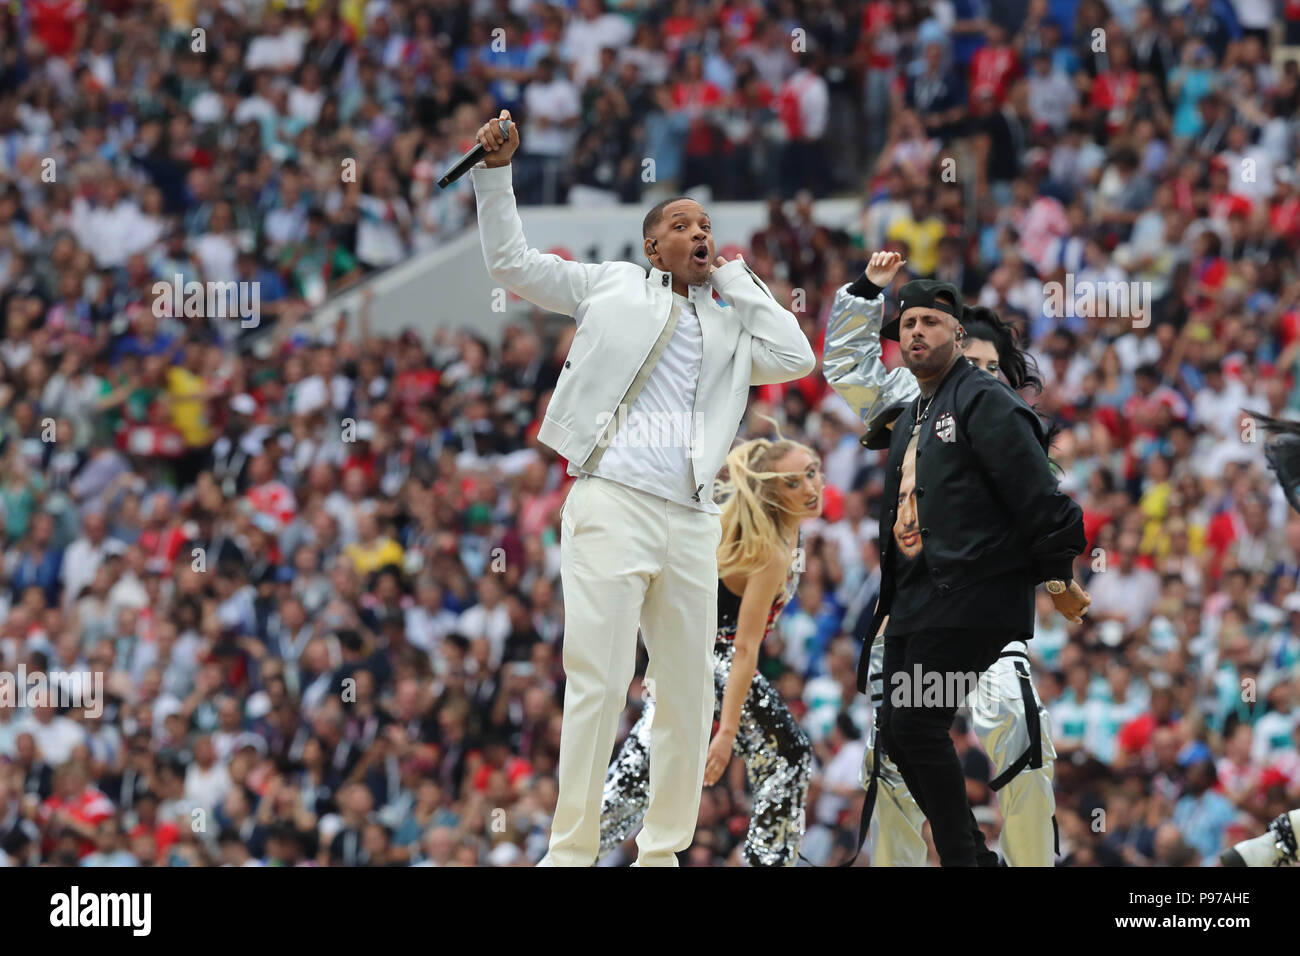 Moscow, Russia. 15th July, 2018. U.S. actor Will Smith (L front) performs at the closing ceremony of the 2018 FIFA World Cup in Moscow, Russia, July 15, 2018. Credit: Yang Lei/Xinhua/Alamy Live News Stock Photo